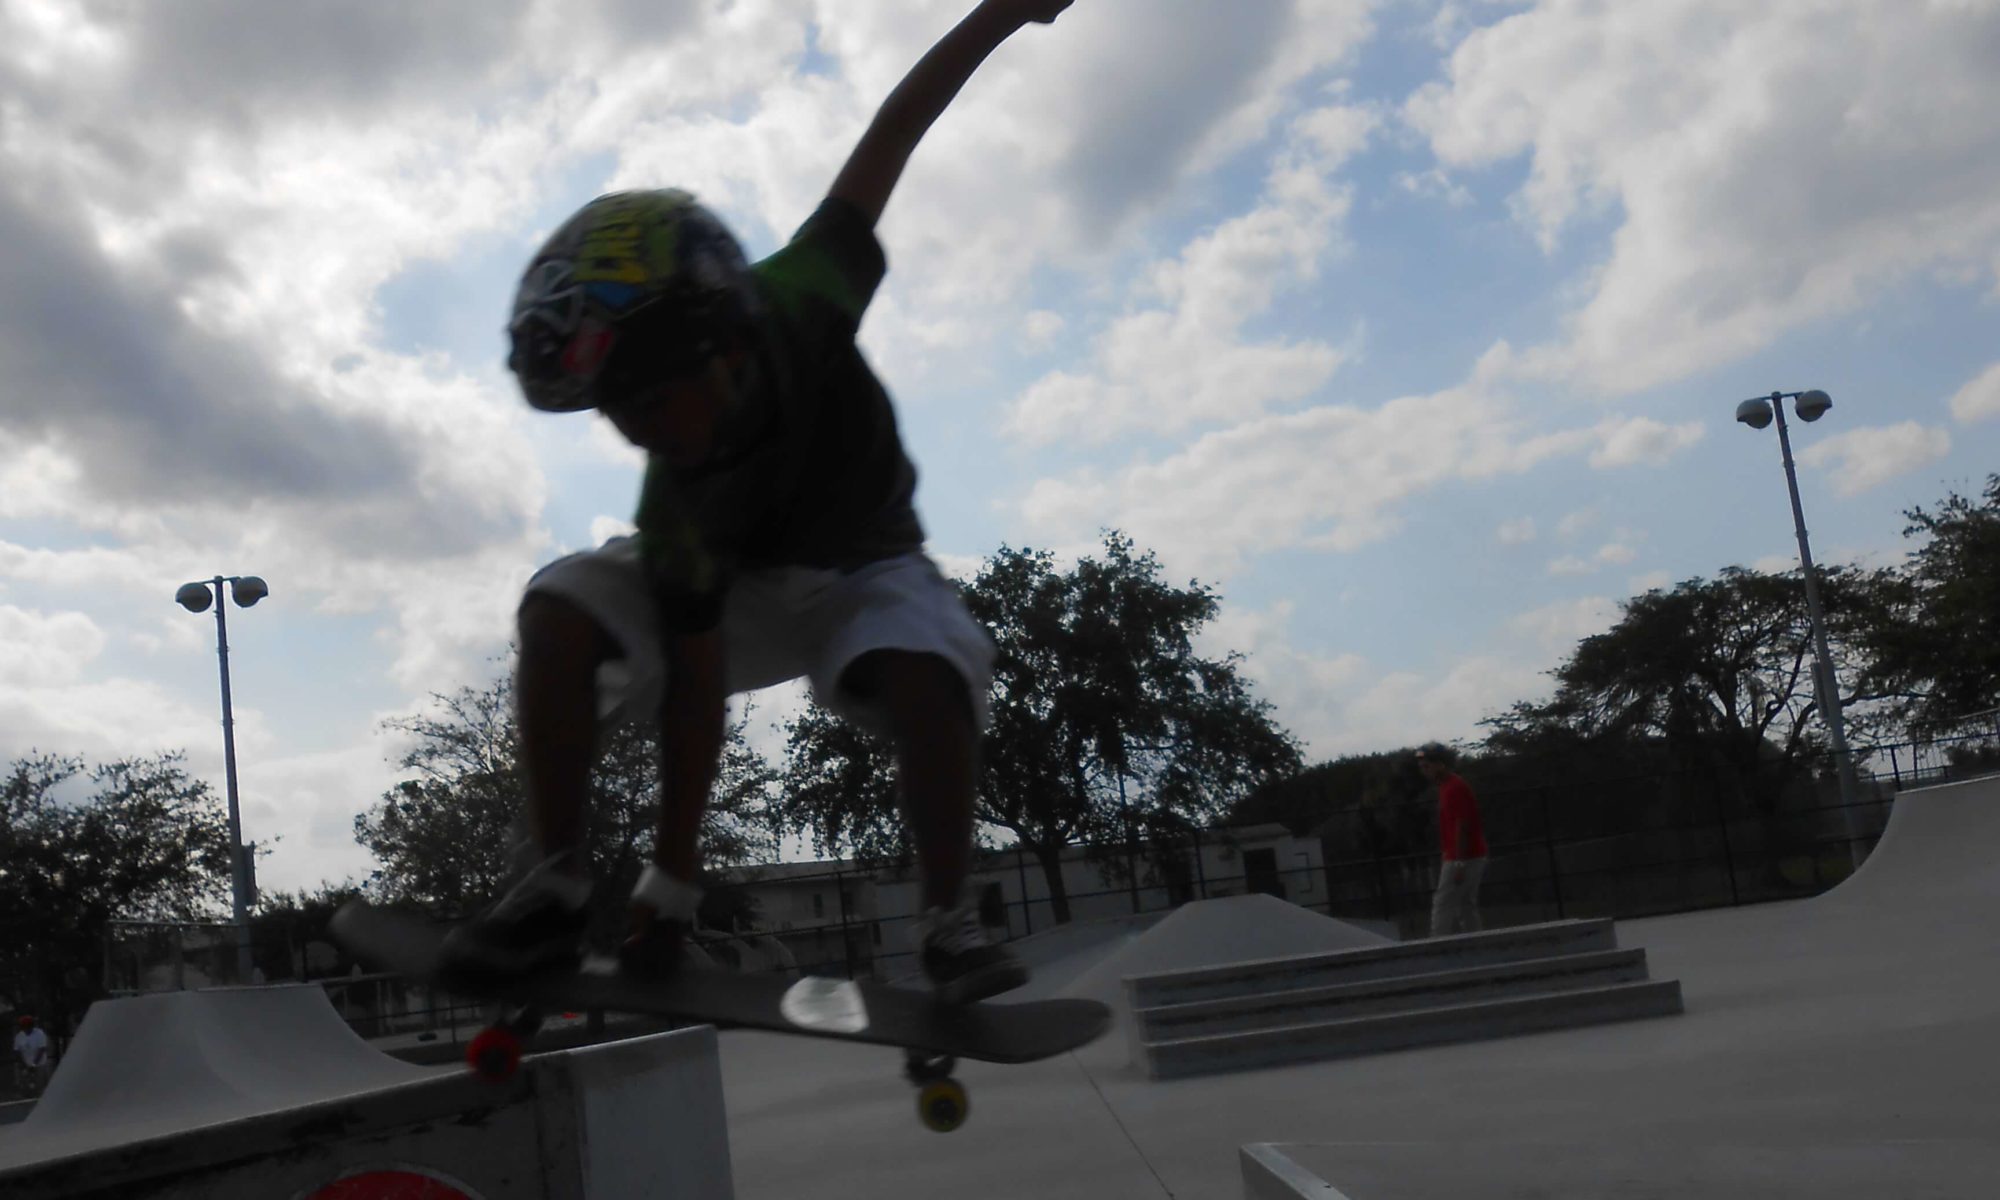 Jose Castillo, skater, off the kicker at Westwind Lakes Skate Park March 29, 2013